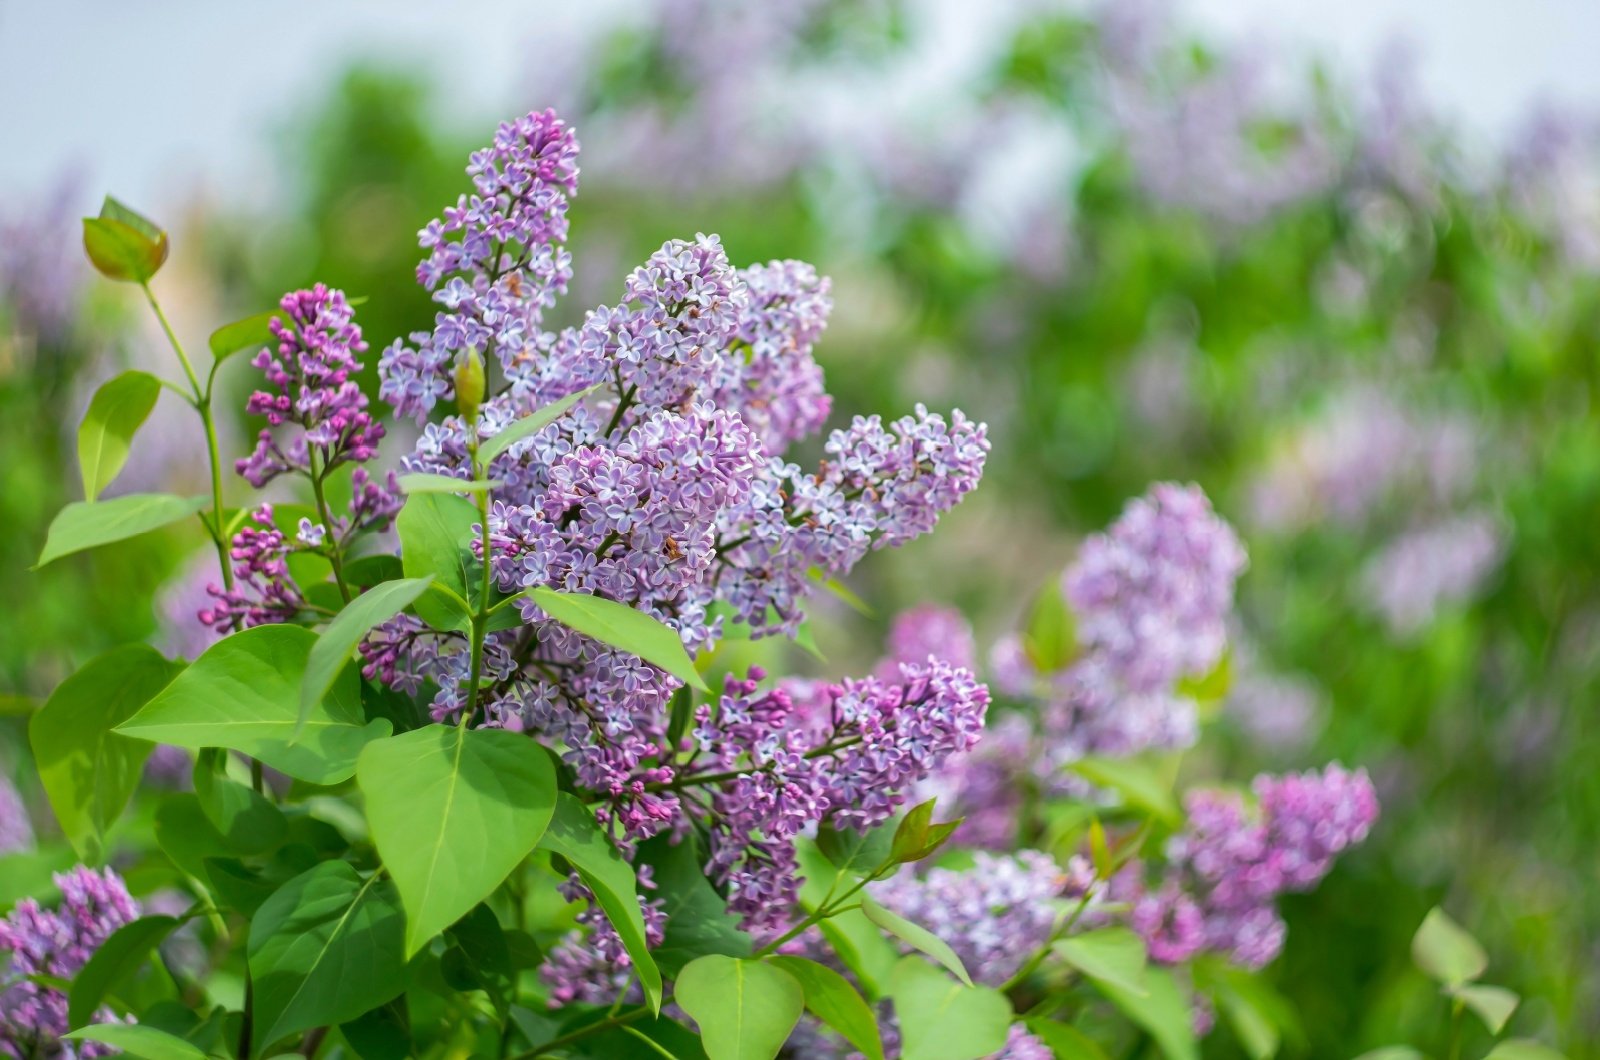 Lilac flower blooming